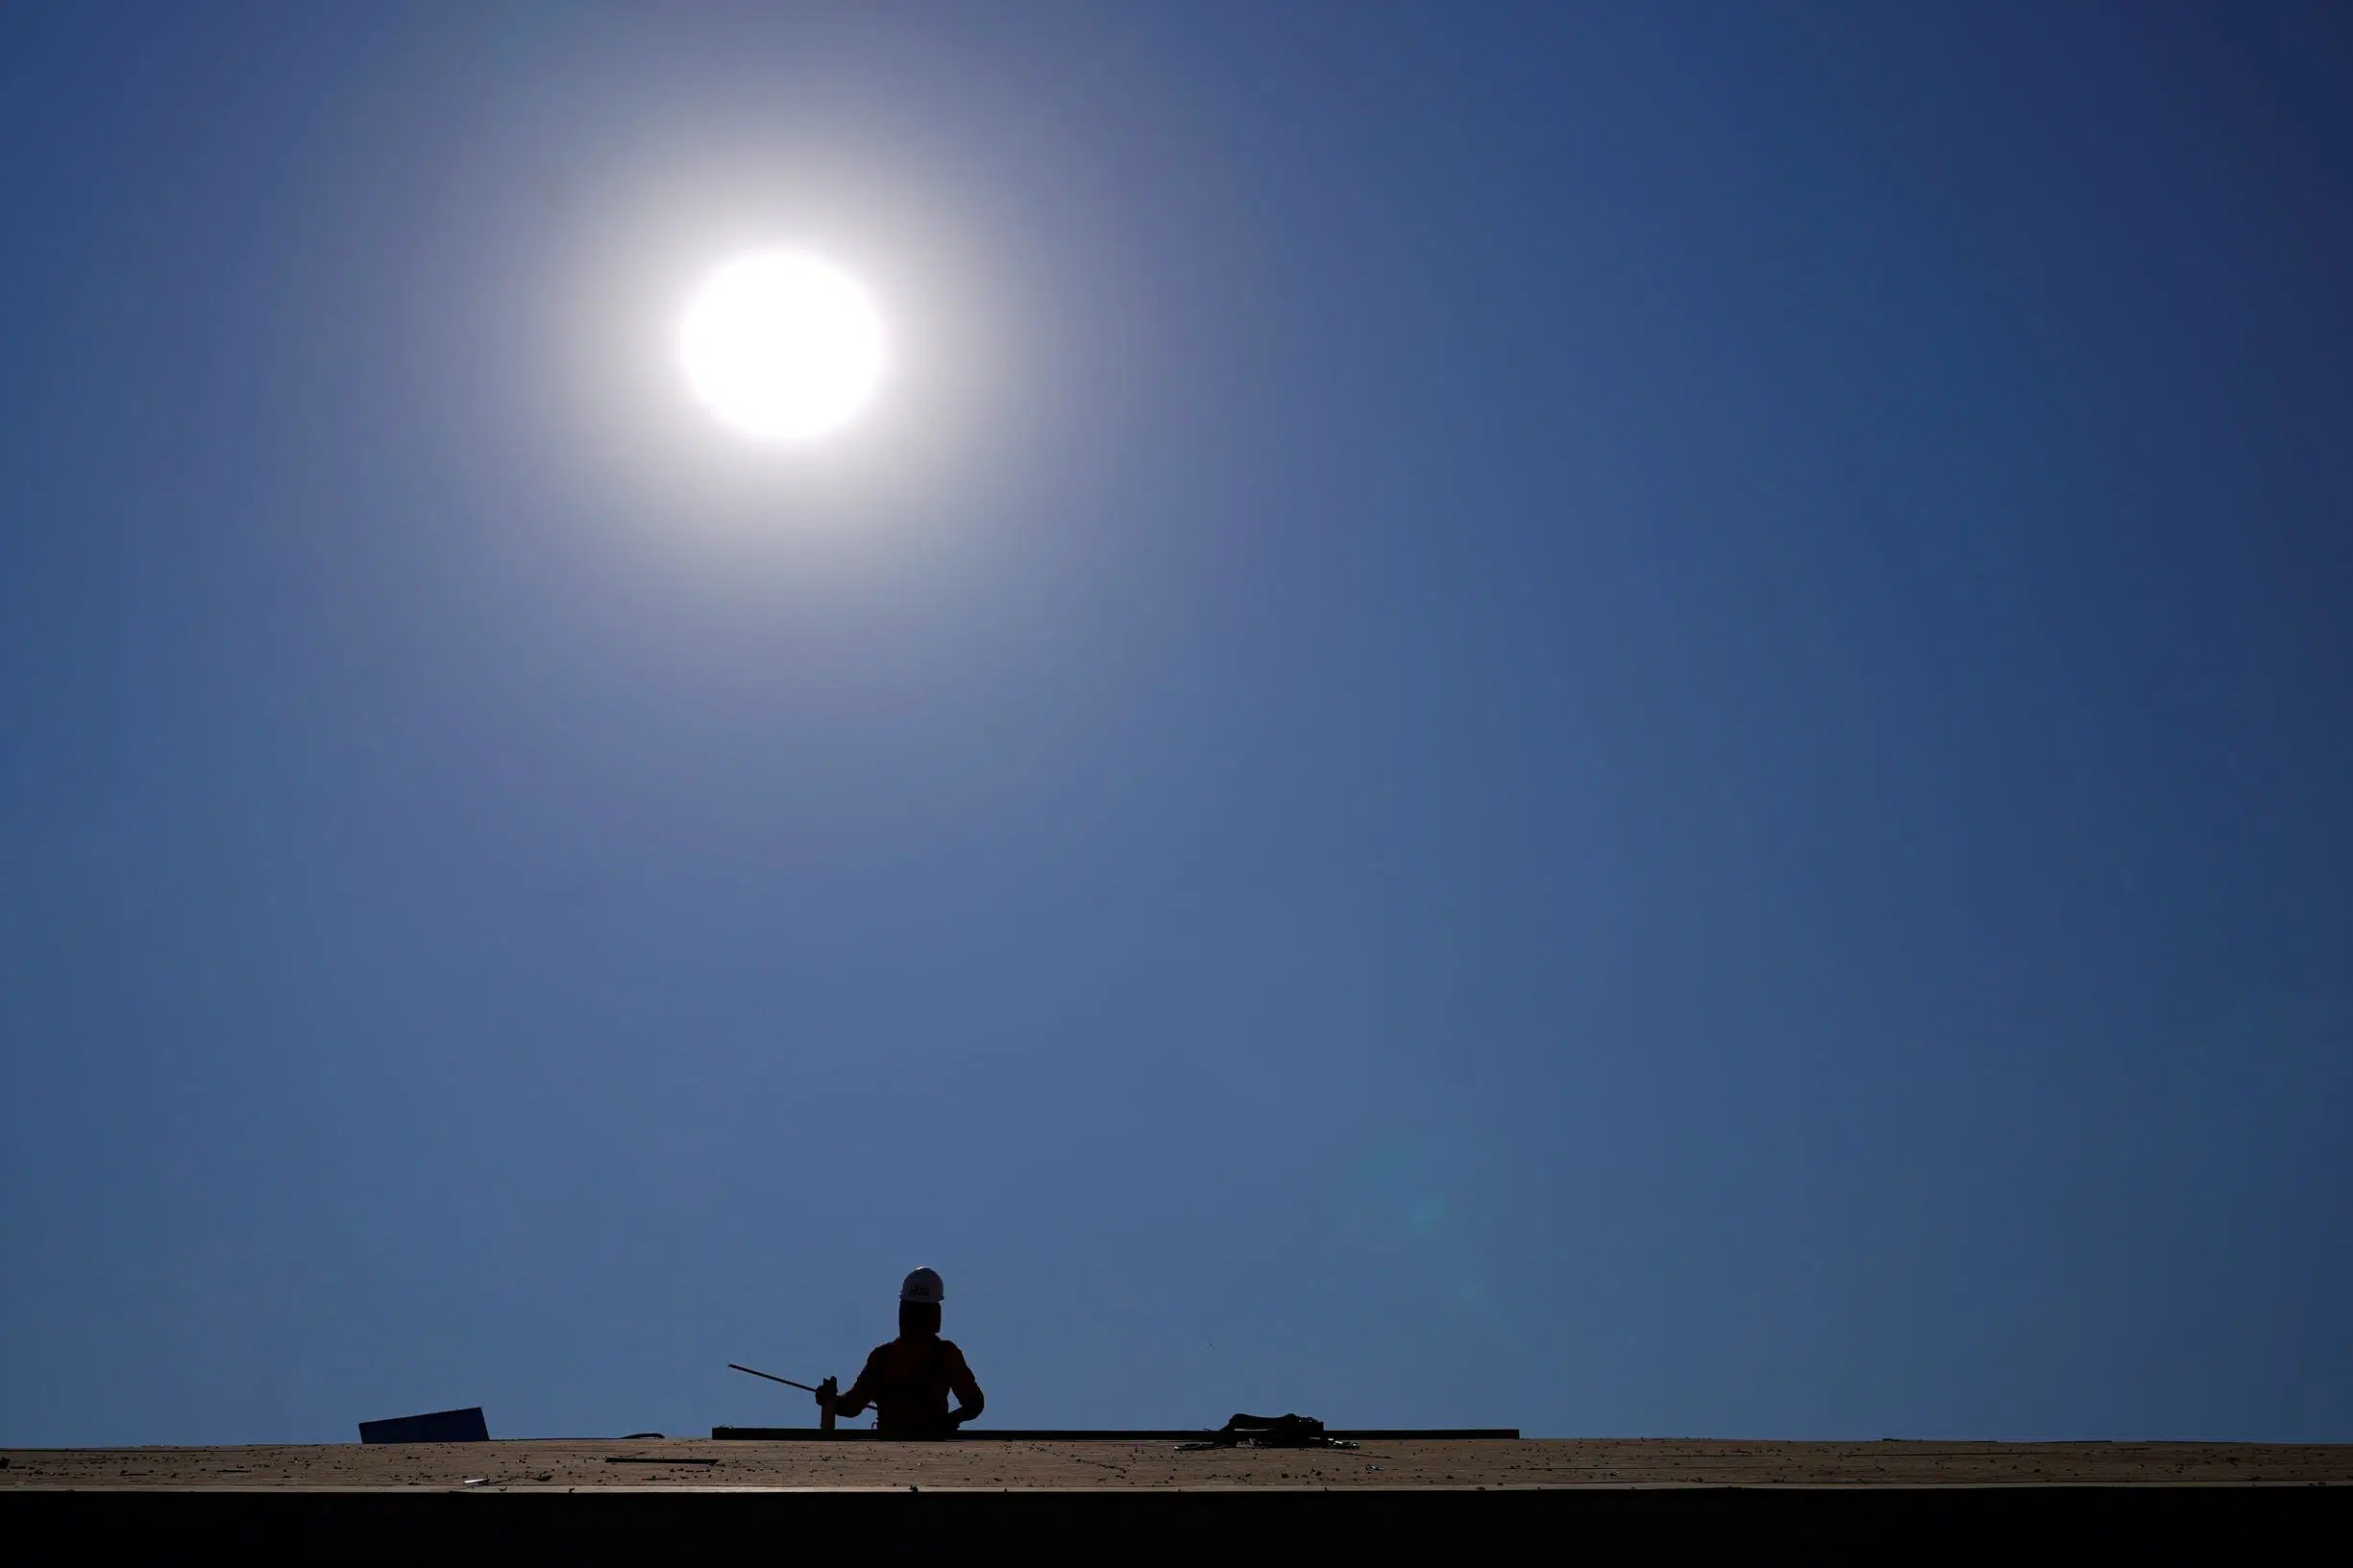 EXPLAINER: What’s Behind the Heat Wave in the American West?